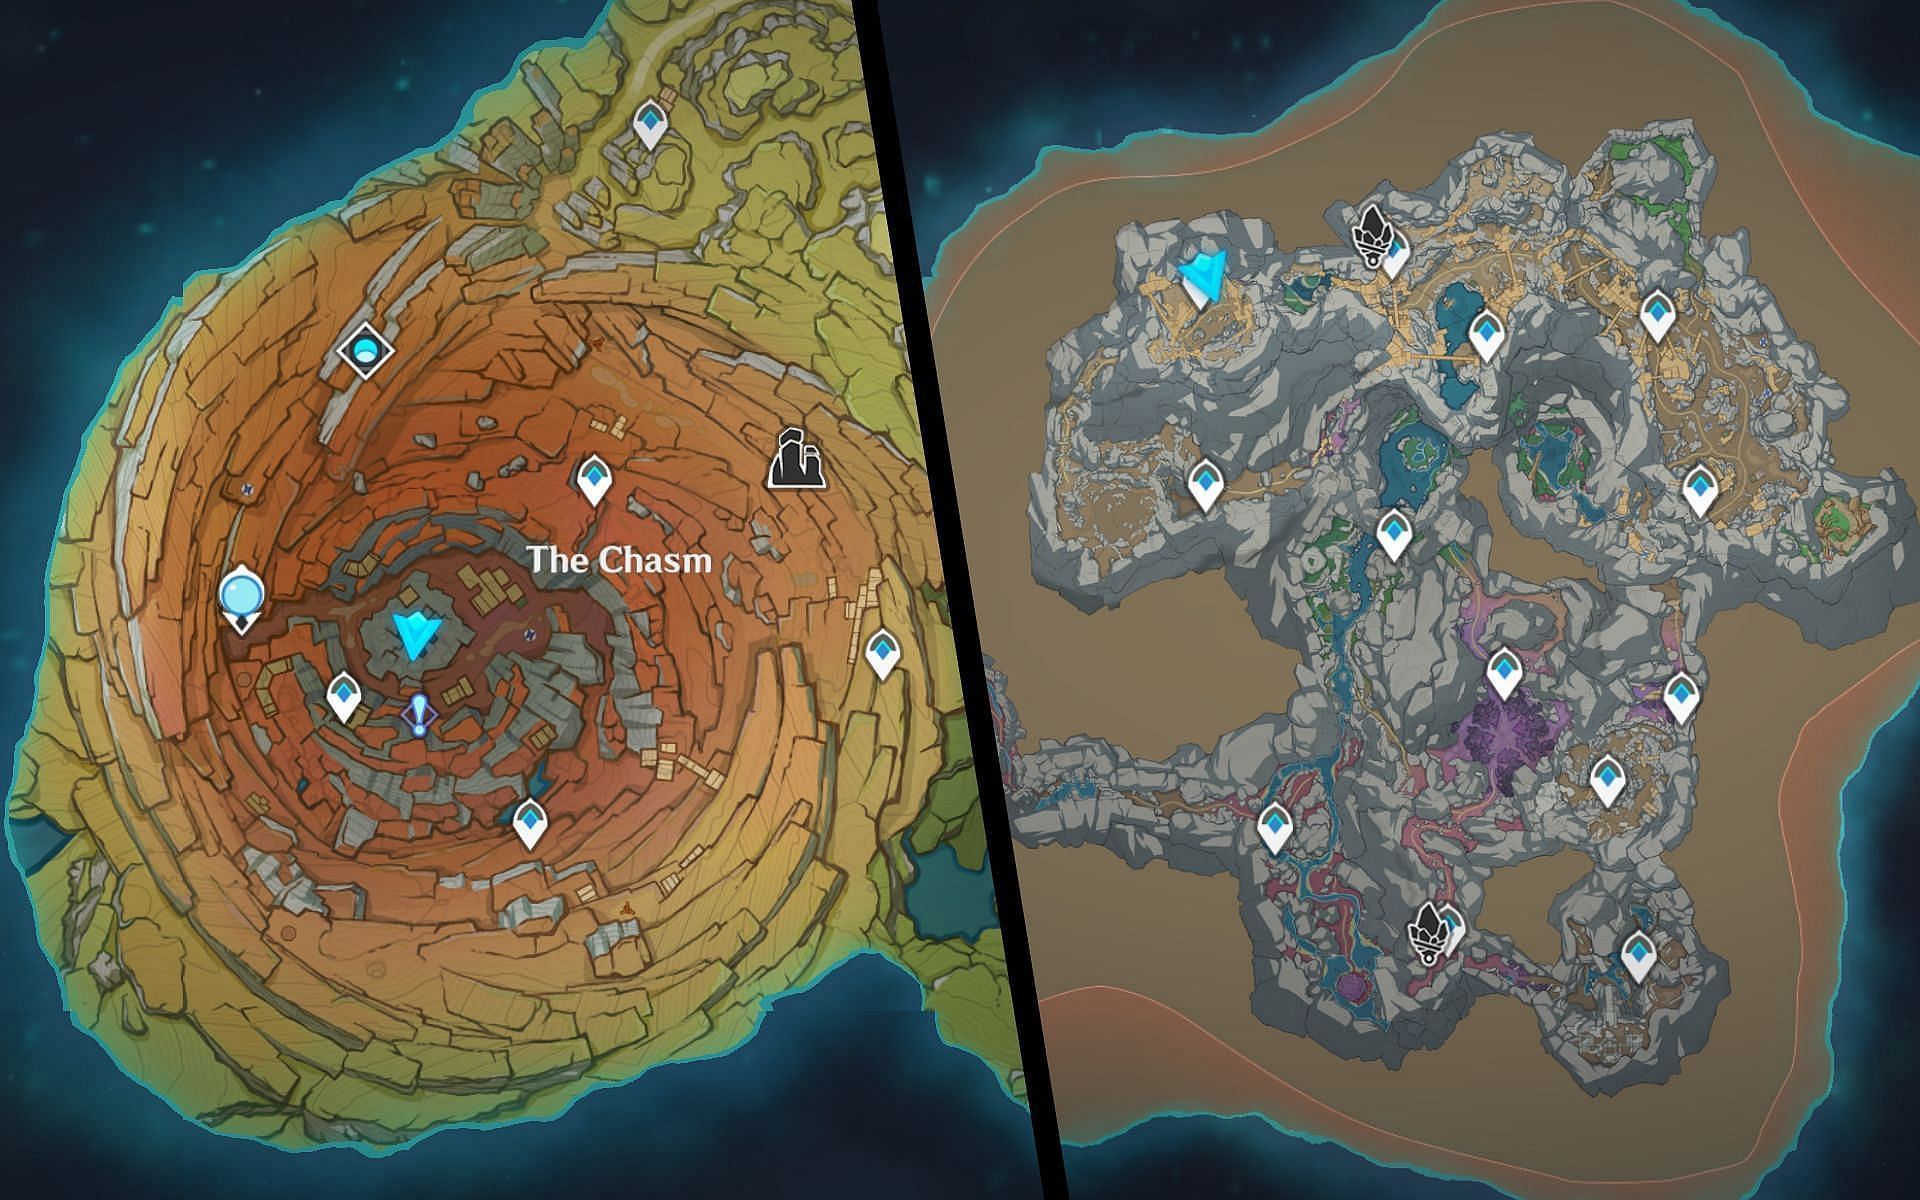 Two maps associated with The Chasm in Genshin Impact 2.6 (Image via miHoYo)